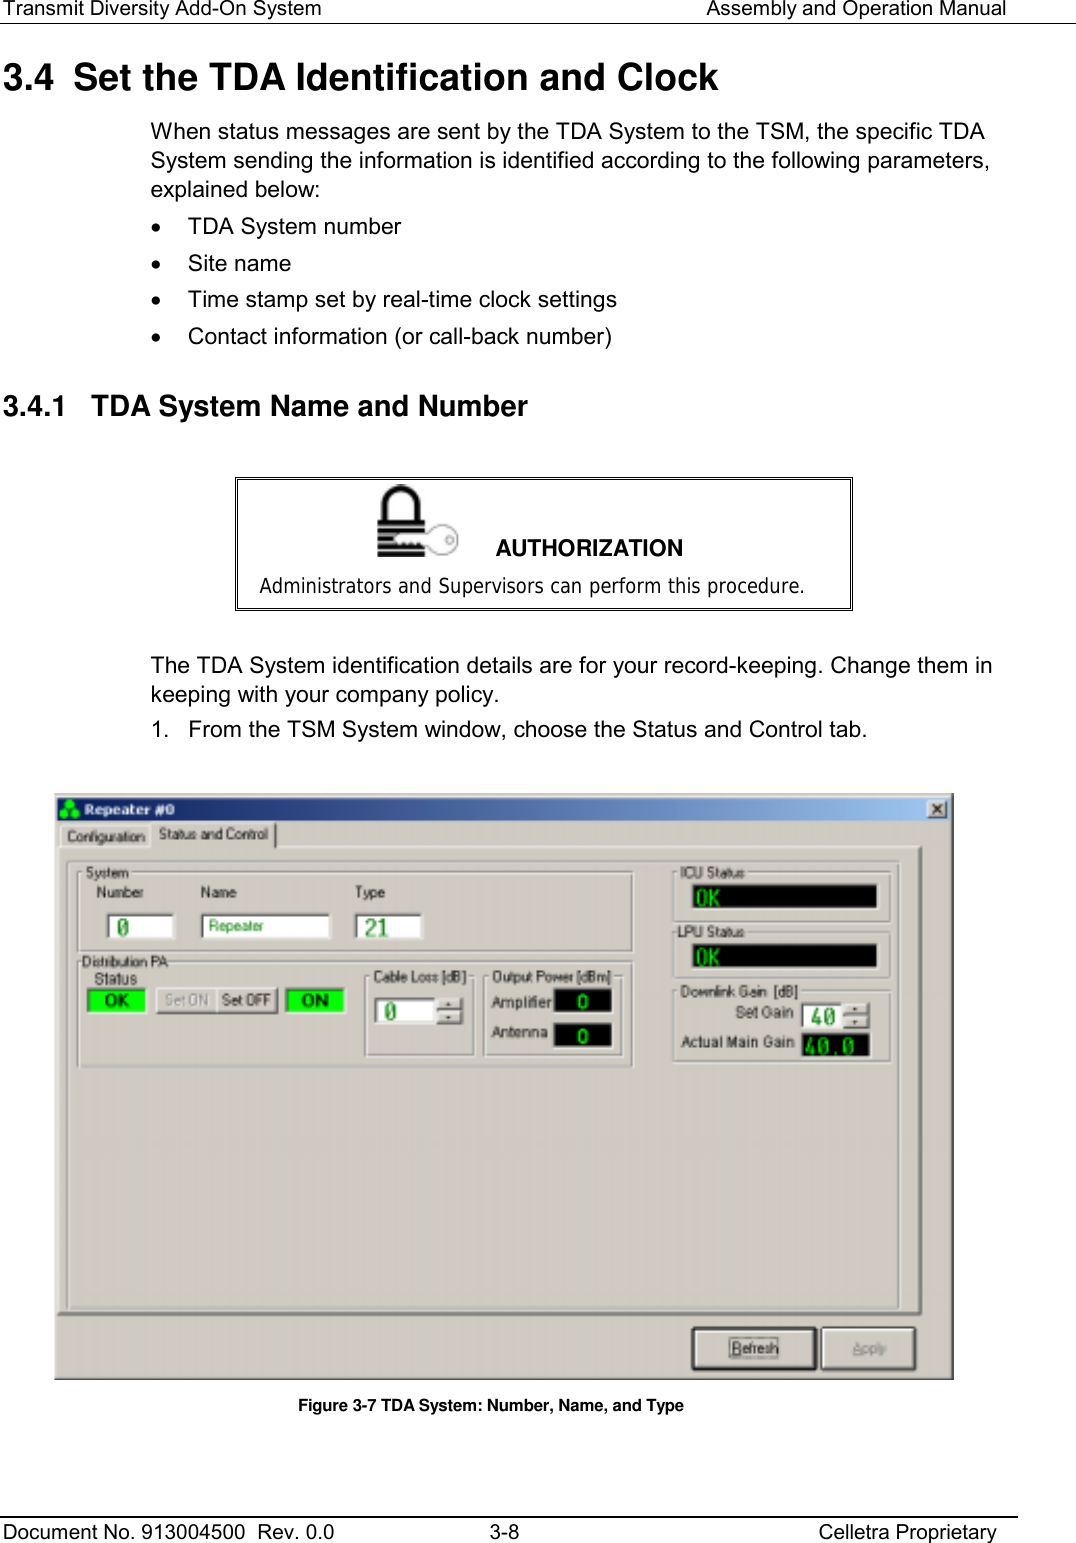 Transmit Diversity Add-On System   Assembly and Operation Manual  Document No. 913004500  Rev. 0.0  3-8  Celletra Proprietary  3.4  Set the TDA Identification and Clock When status messages are sent by the TDA System to the TSM, the specific TDA System sending the information is identified according to the following parameters, explained below: •  TDA System number •  Site name •  Time stamp set by real-time clock settings •  Contact information (or call-back number) 3.4.1  TDA System Name and Number   AUTHORIZATION Administrators and Supervisors can perform this procedure.  The TDA System identification details are for your record-keeping. Change them in keeping with your company policy. 1.  From the TSM System window, choose the Status and Control tab.   Figure  3-7 TDA System: Number, Name, and Type   